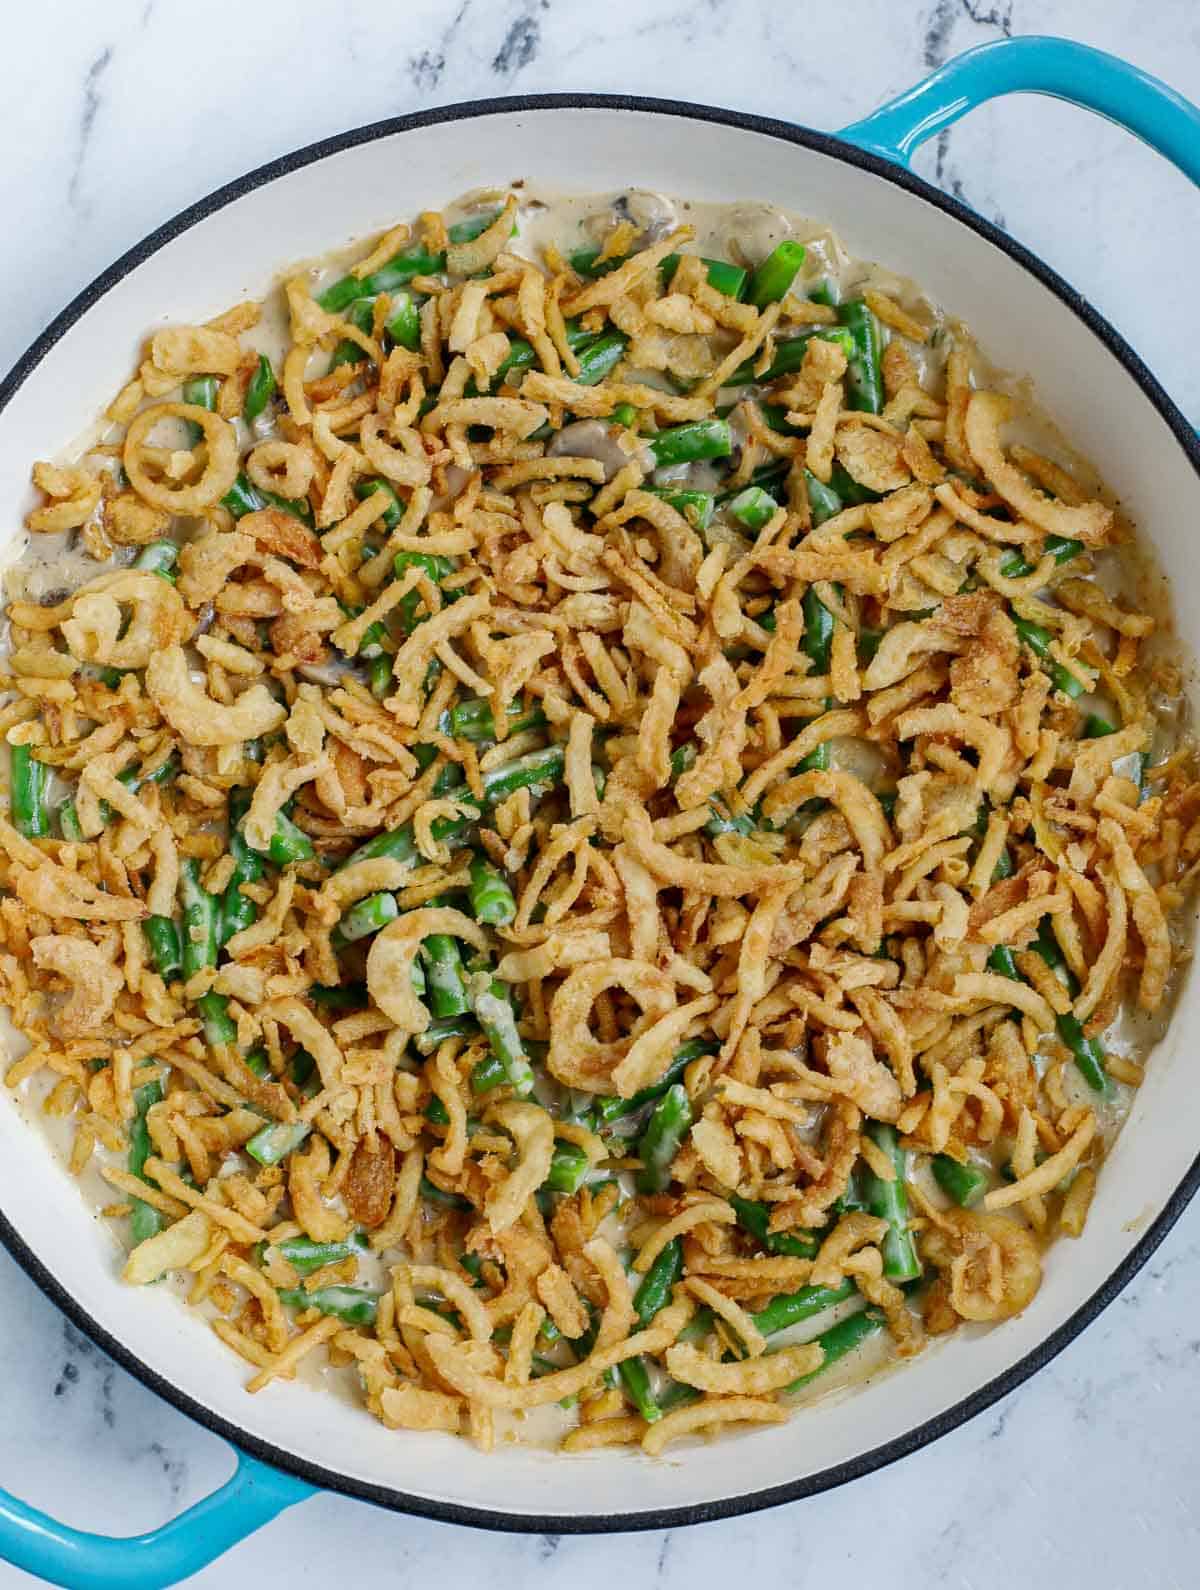 green been casserole topped with fried onions before baking